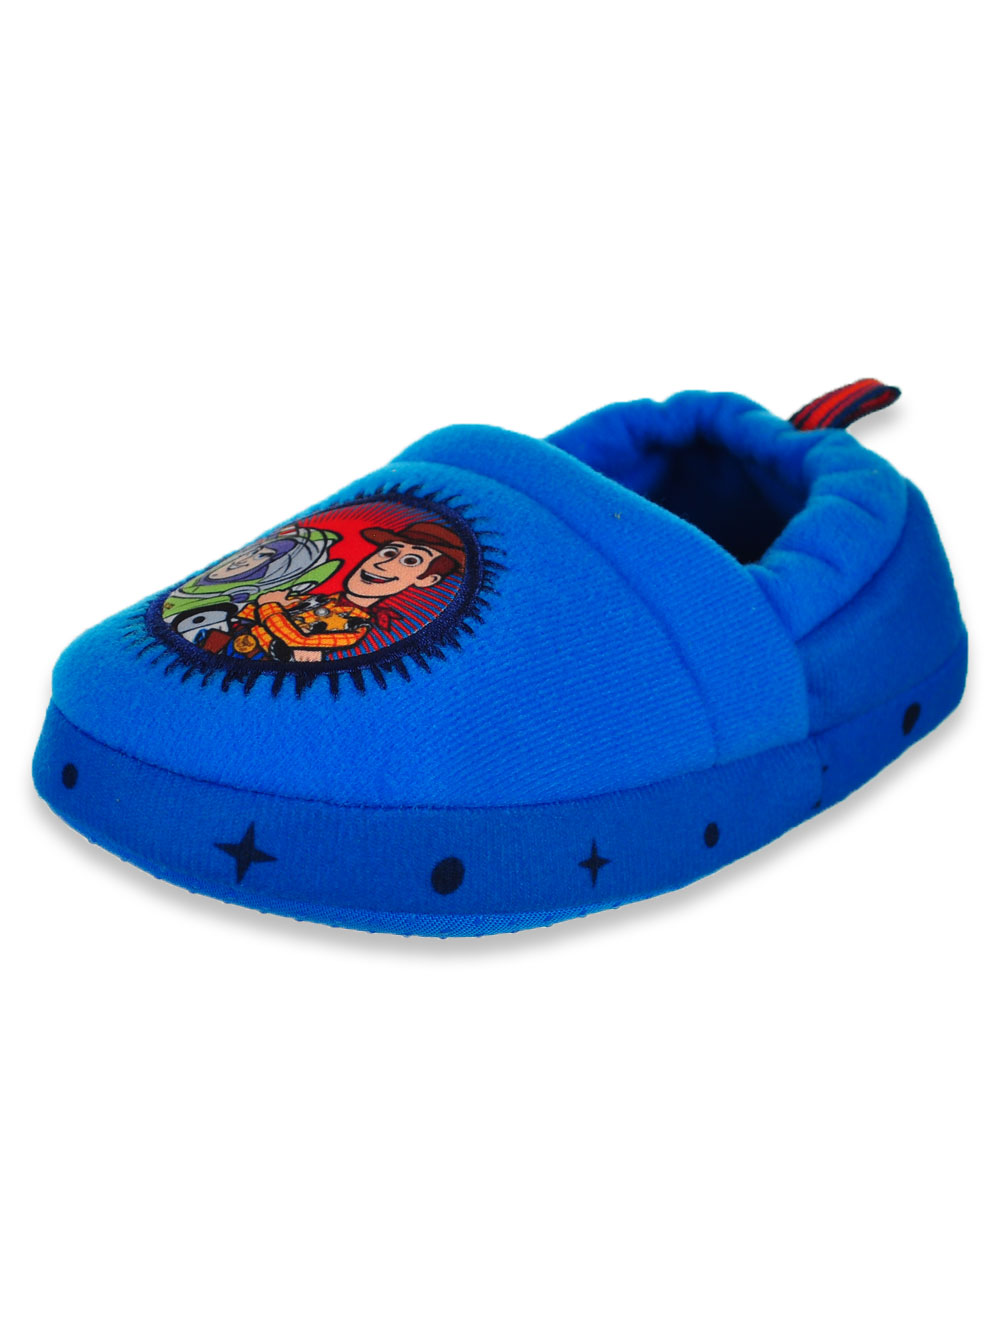 sleepers shoes for toddlers